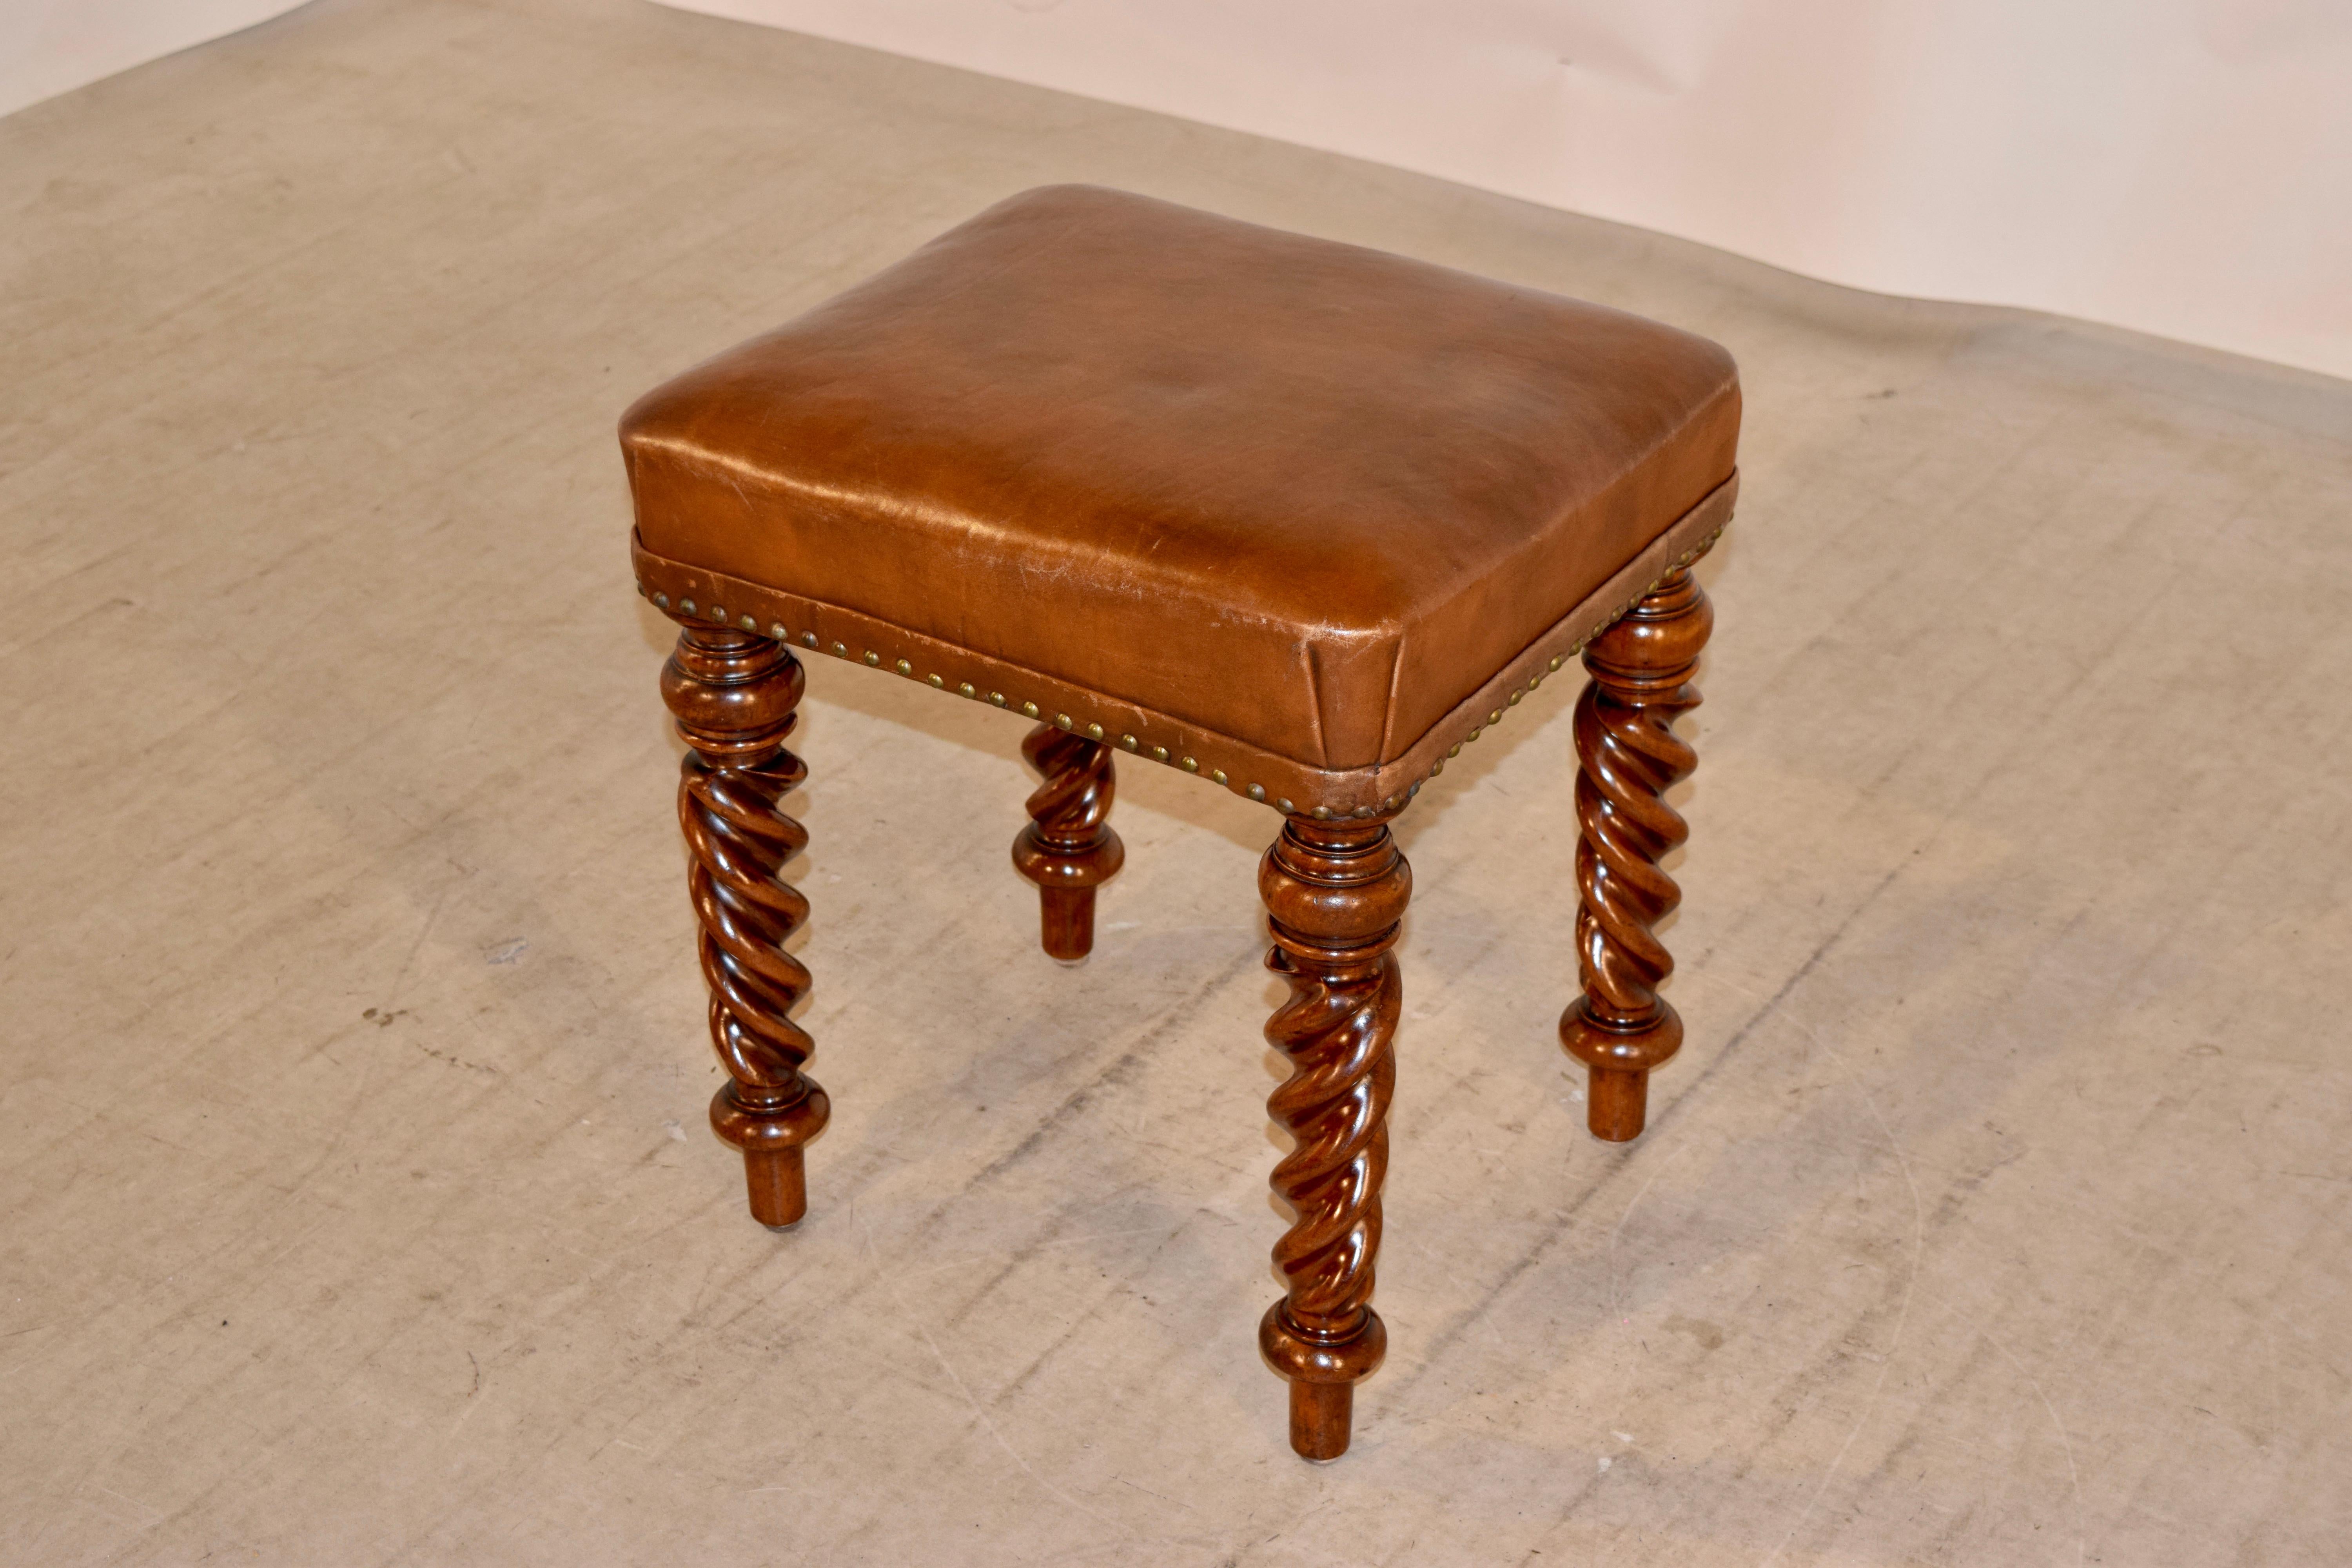 Turned 19th Century English Mahogany Stool with Leather Top